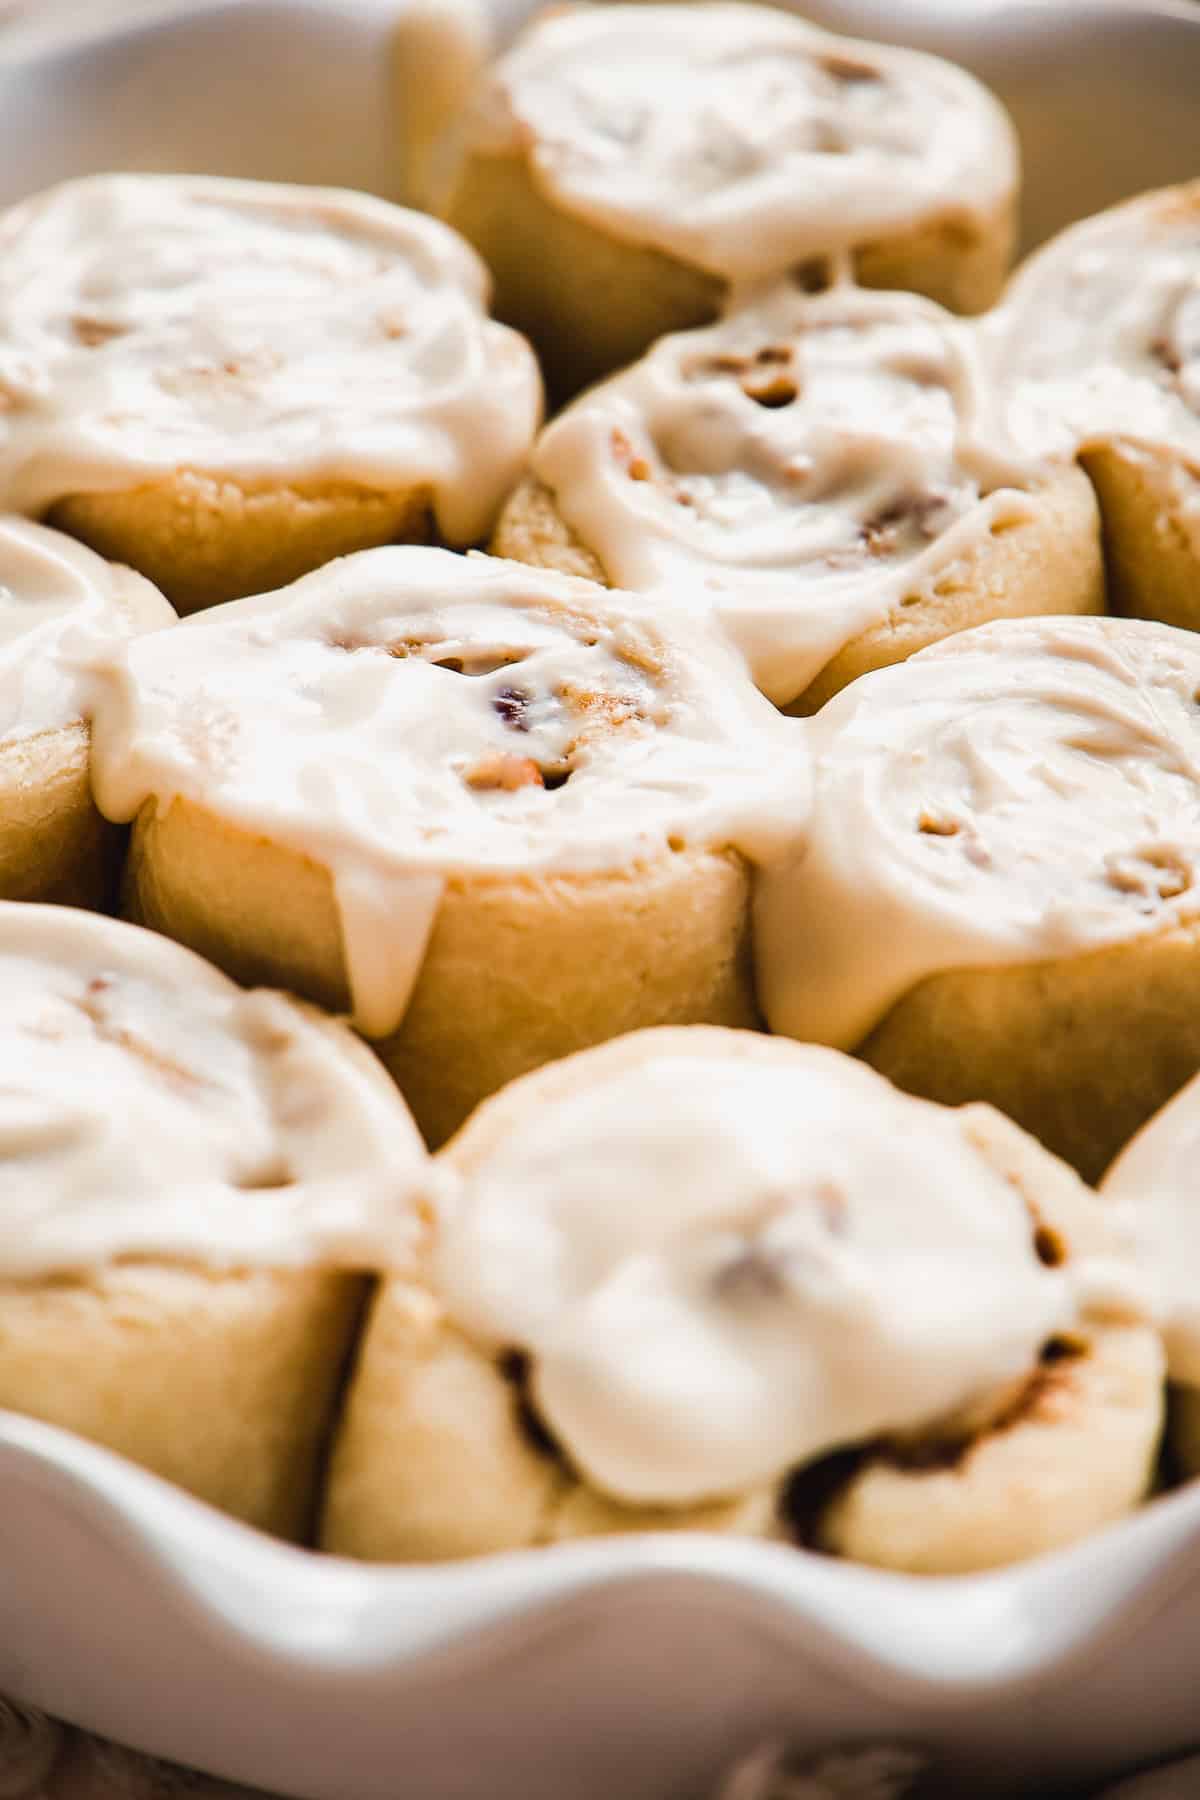 Up close view of baked cinnamon rolls with icing in a pan.